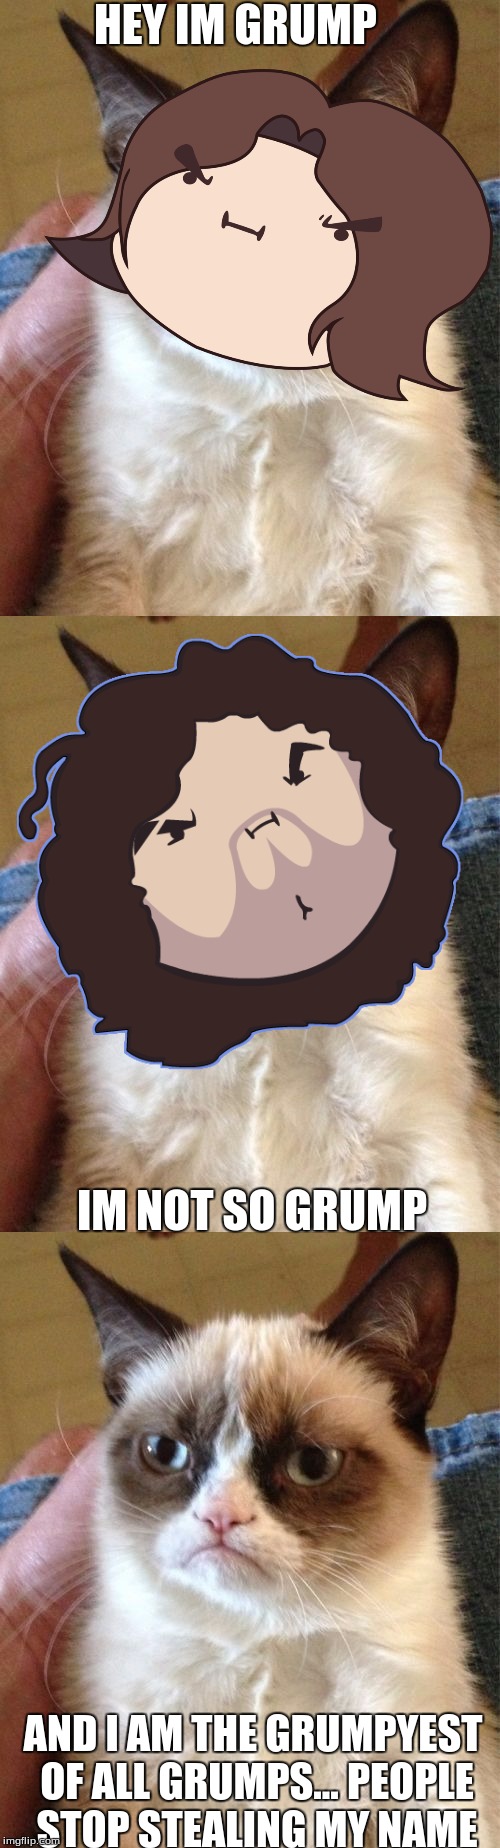 game grumpy cat | HEY IM GRUMP; IM NOT SO GRUMP; AND I AM THE GRUMPYEST OF ALL GRUMPS... PEOPLE STOP STEALING MY NAME | image tagged in grumpy cat,game grumps,memes | made w/ Imgflip meme maker